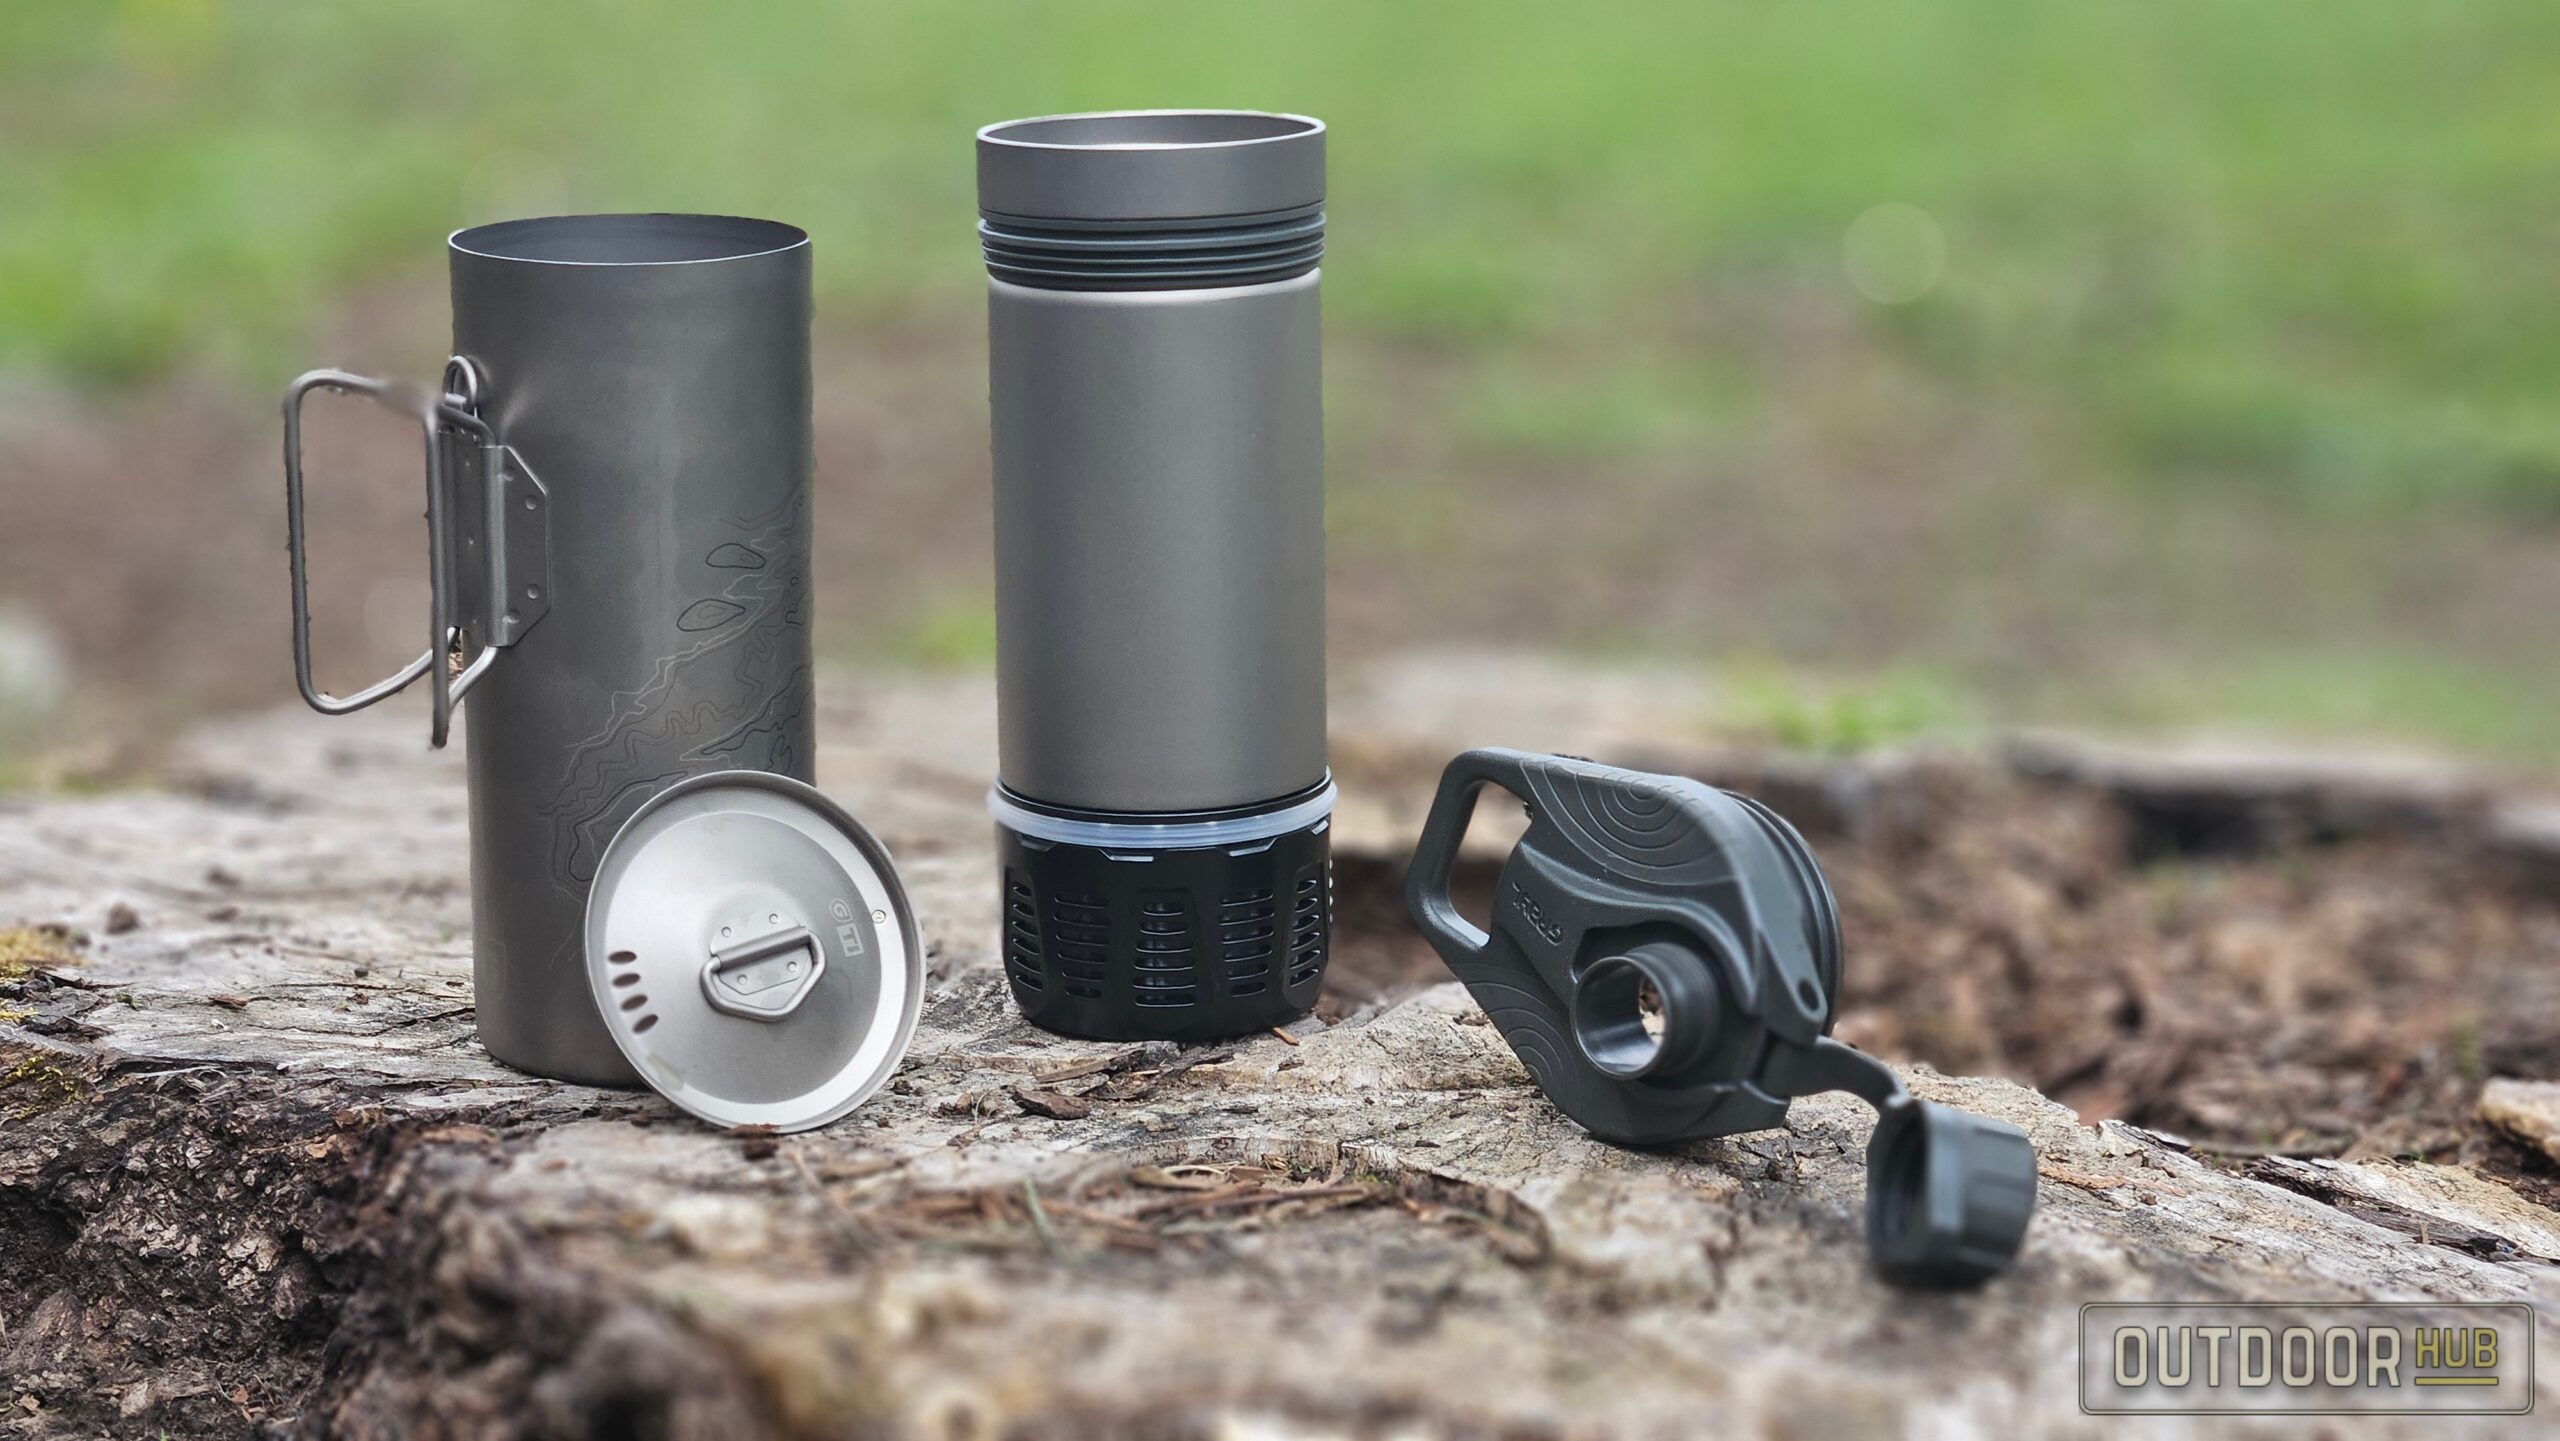 OHUB Review: The Grayl GeoPress Ti Purifier - Lightweight All-In-One